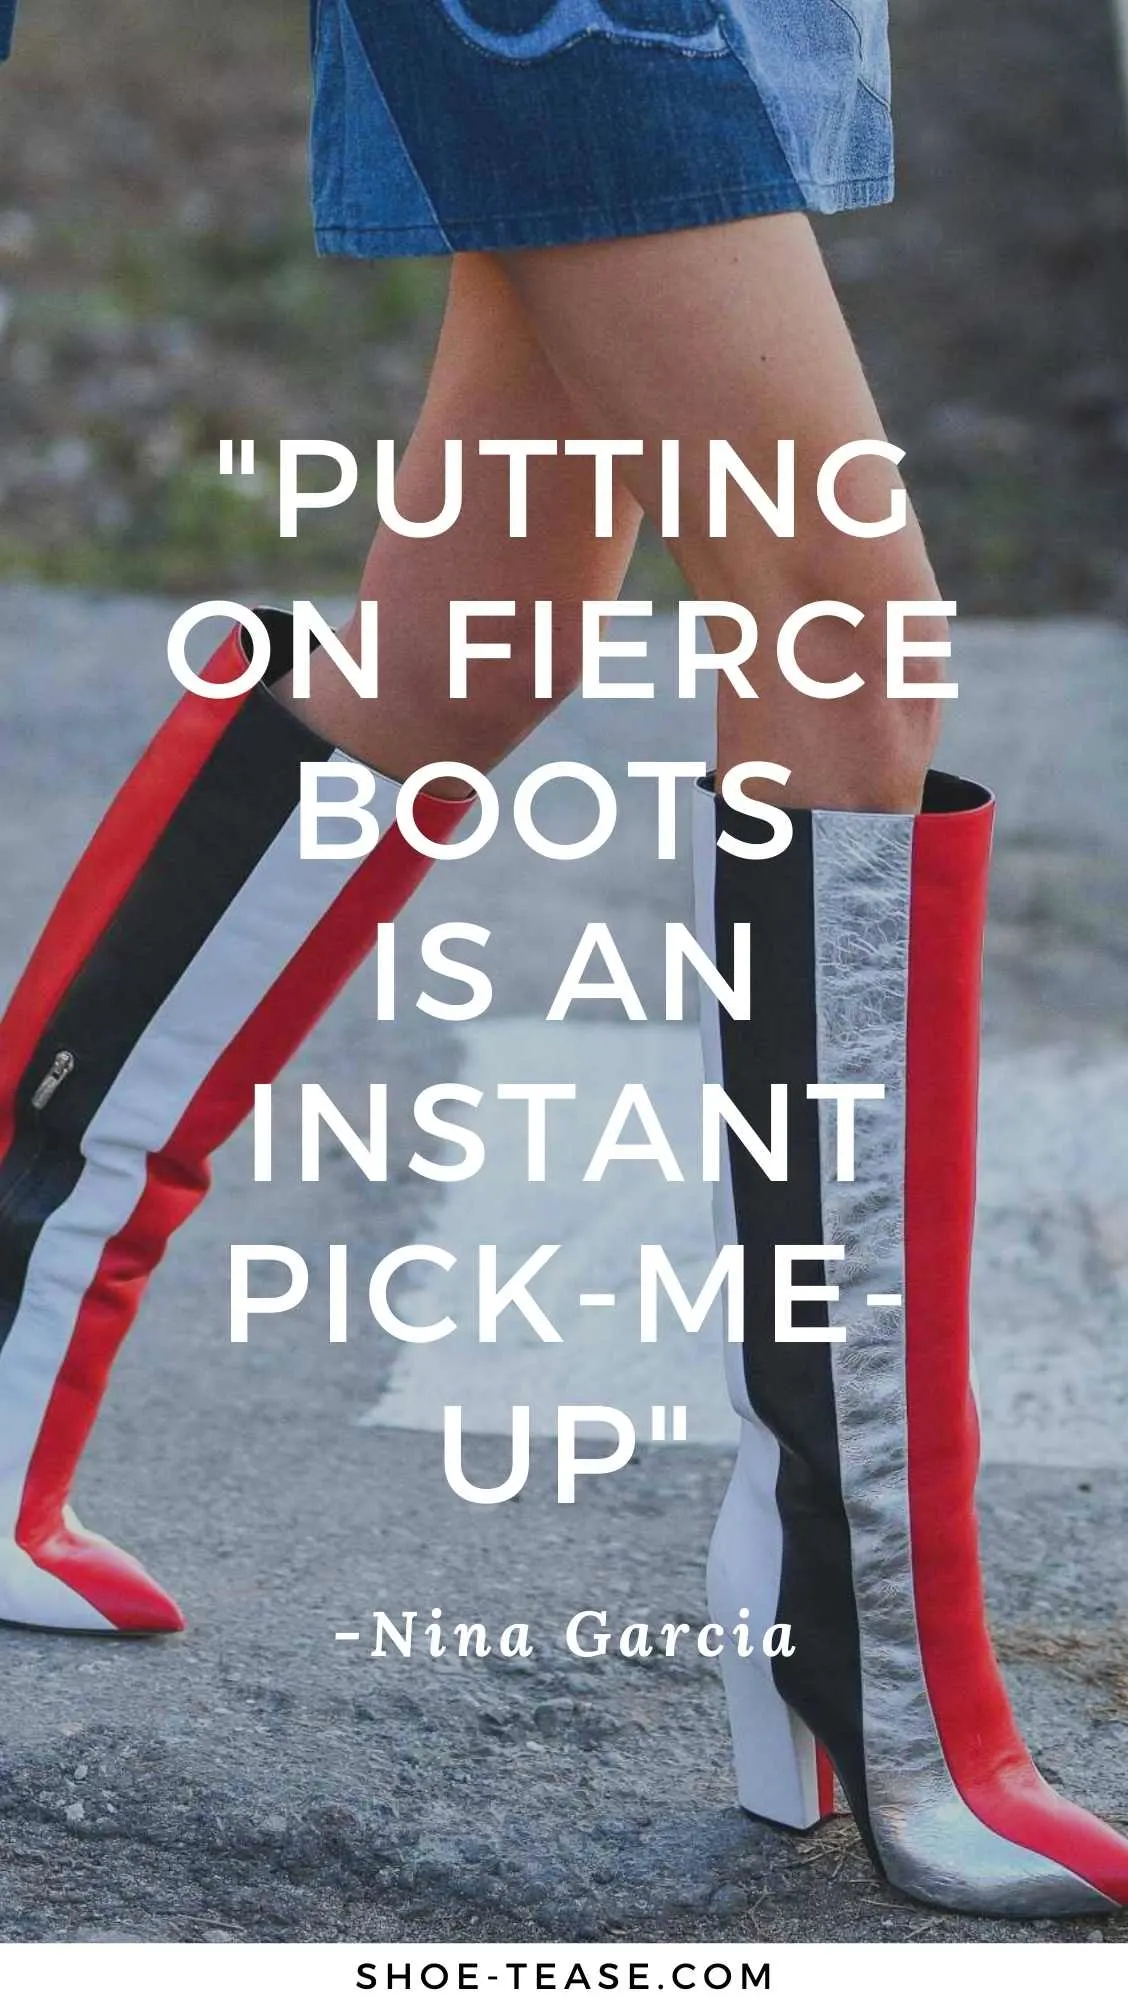 Putting on fierce boots is an instant pick me up text quotes about boots over image of woman walking in boots.